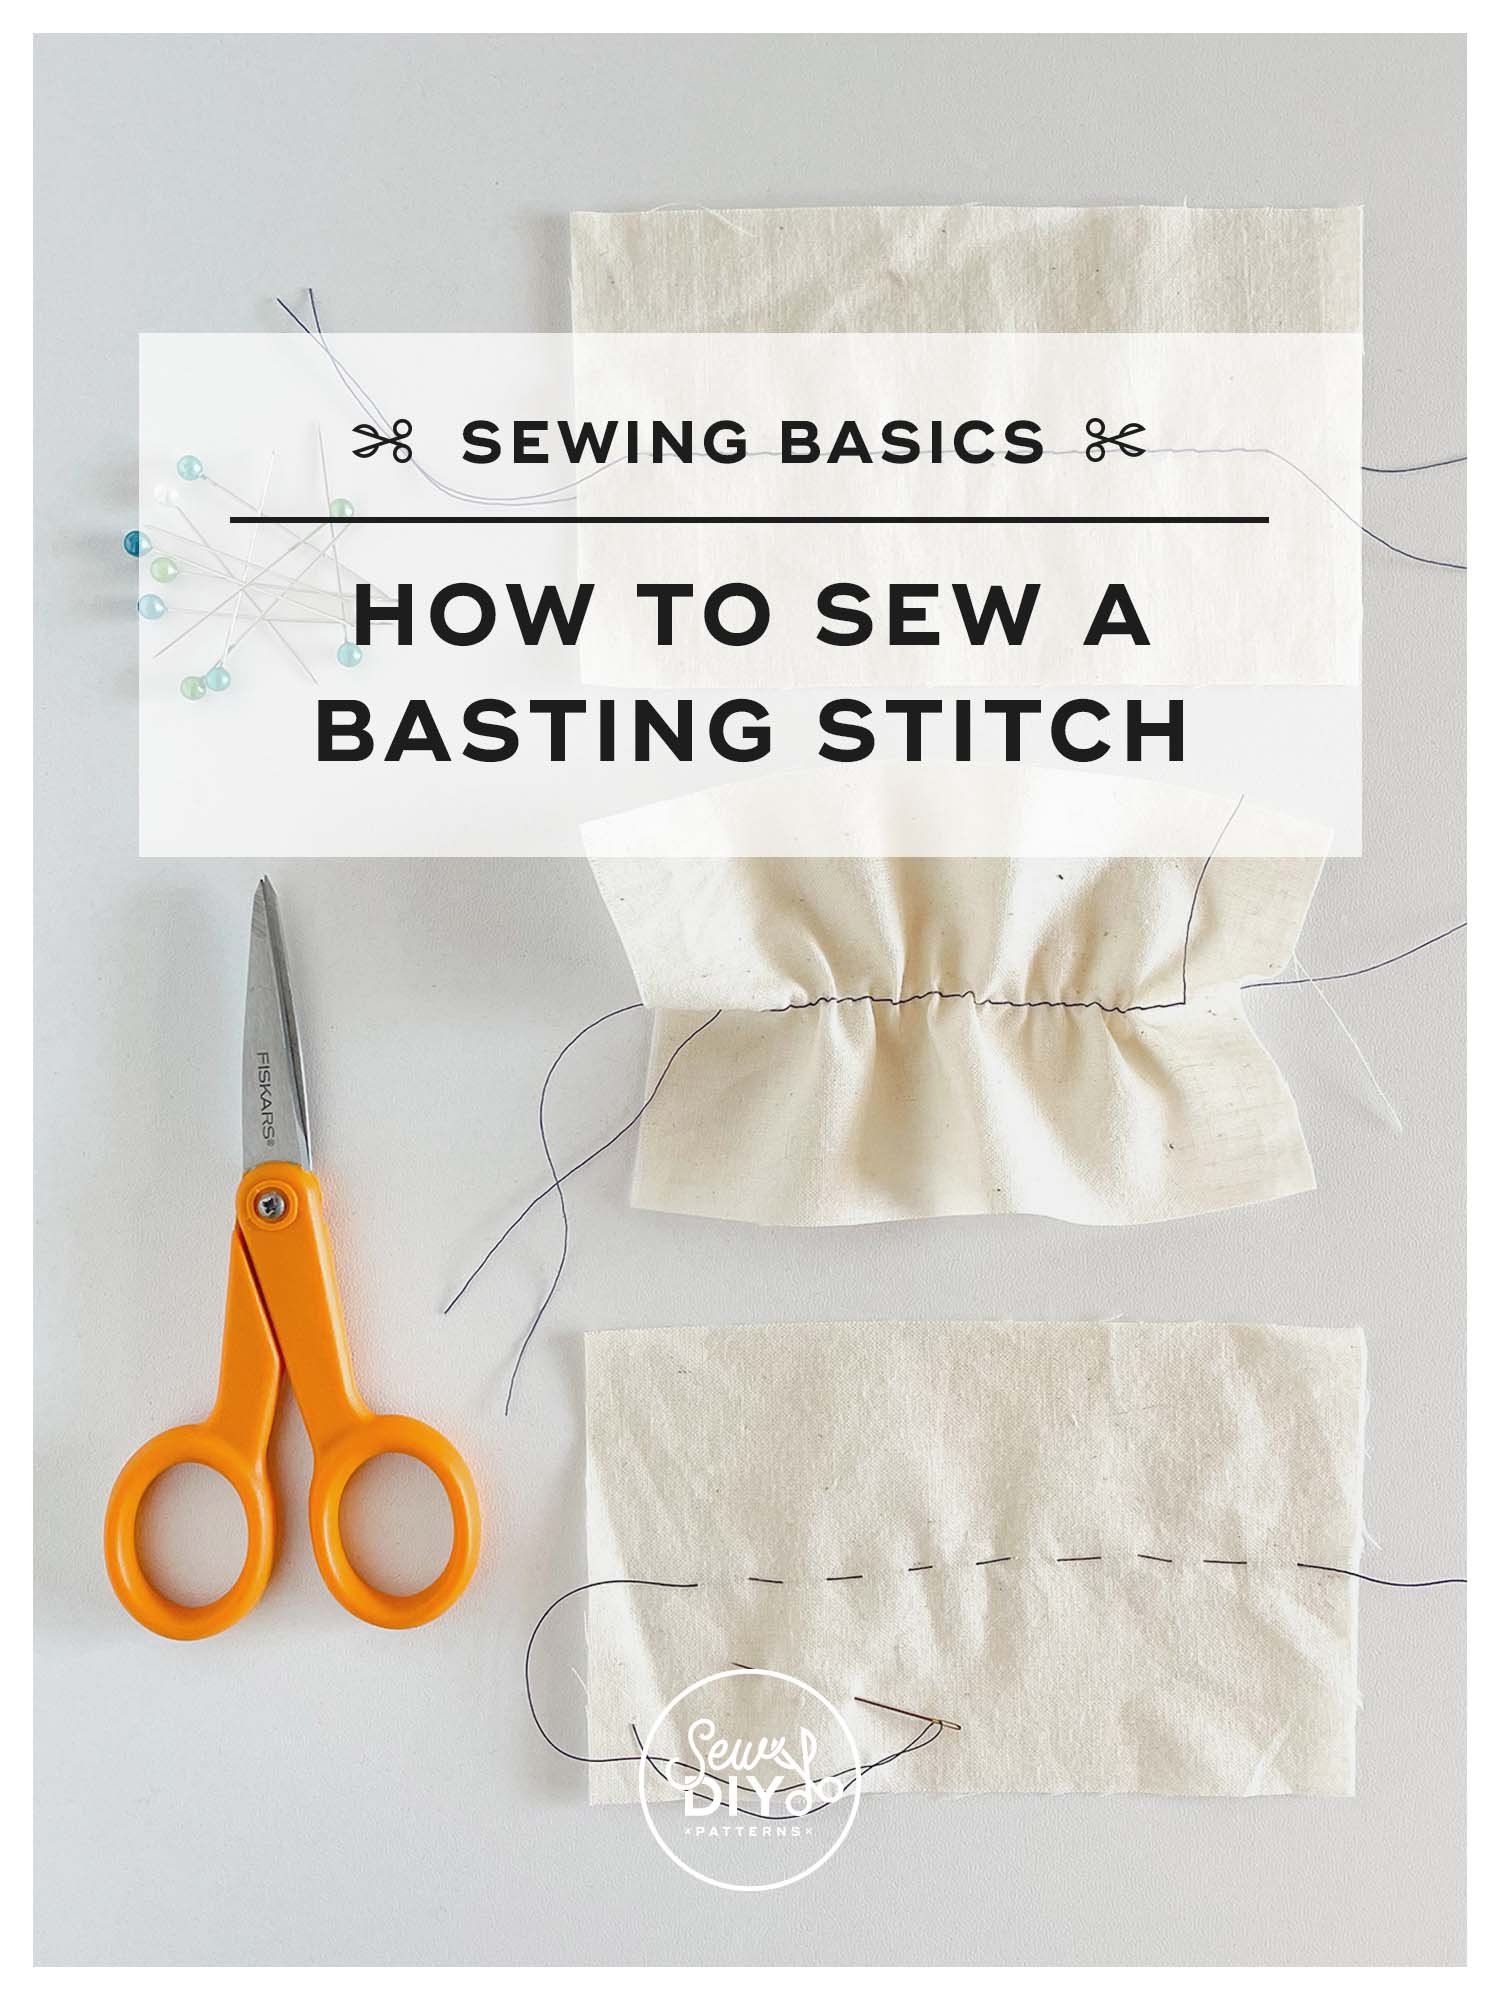 What is Sewing?, What Should I Sew?